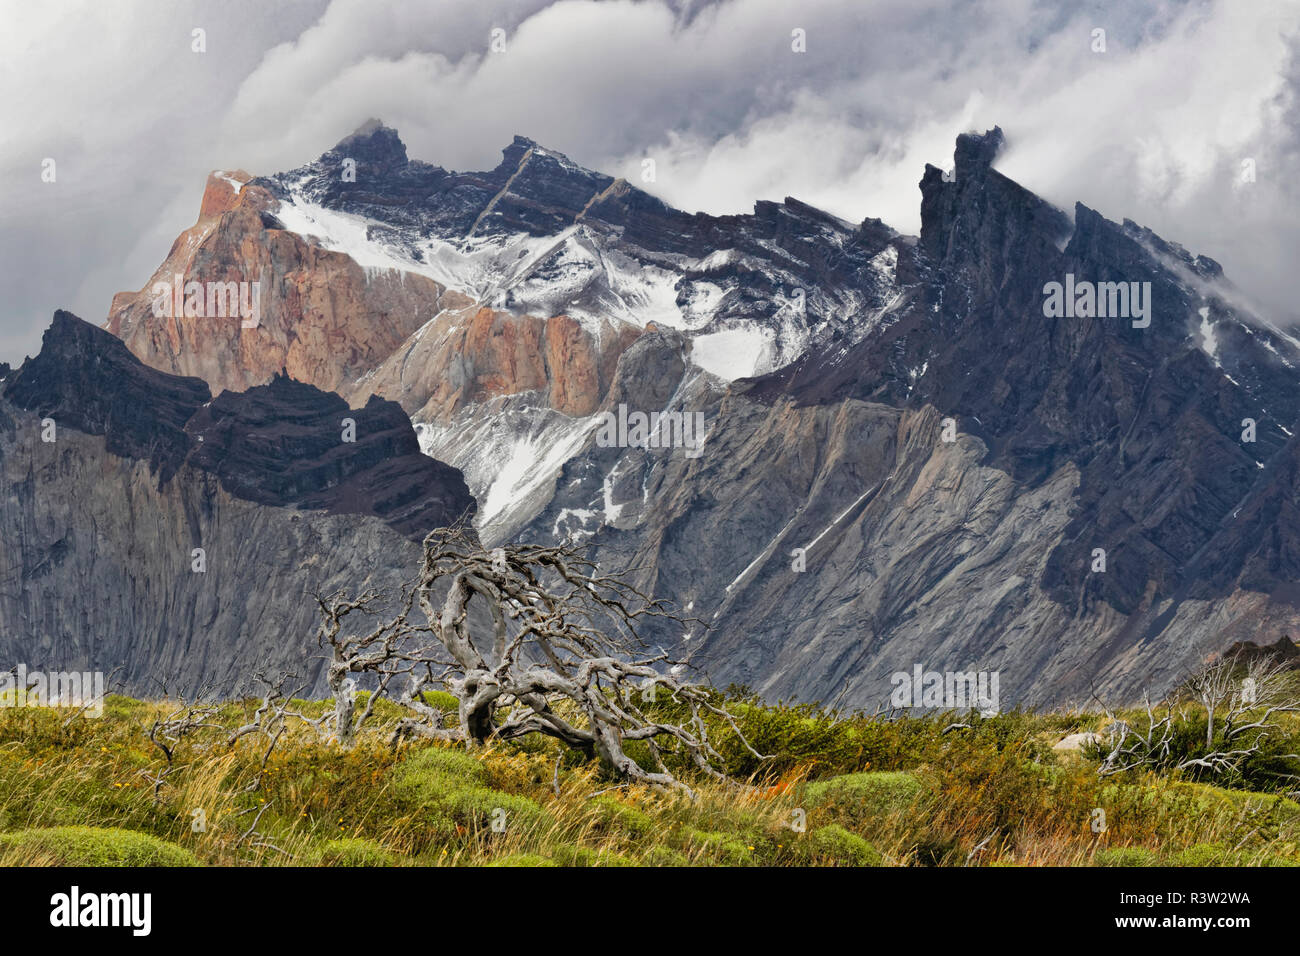 Twisted tree and mountains, Torres del Paine National Park, Chile. Patagonia Stock Photo